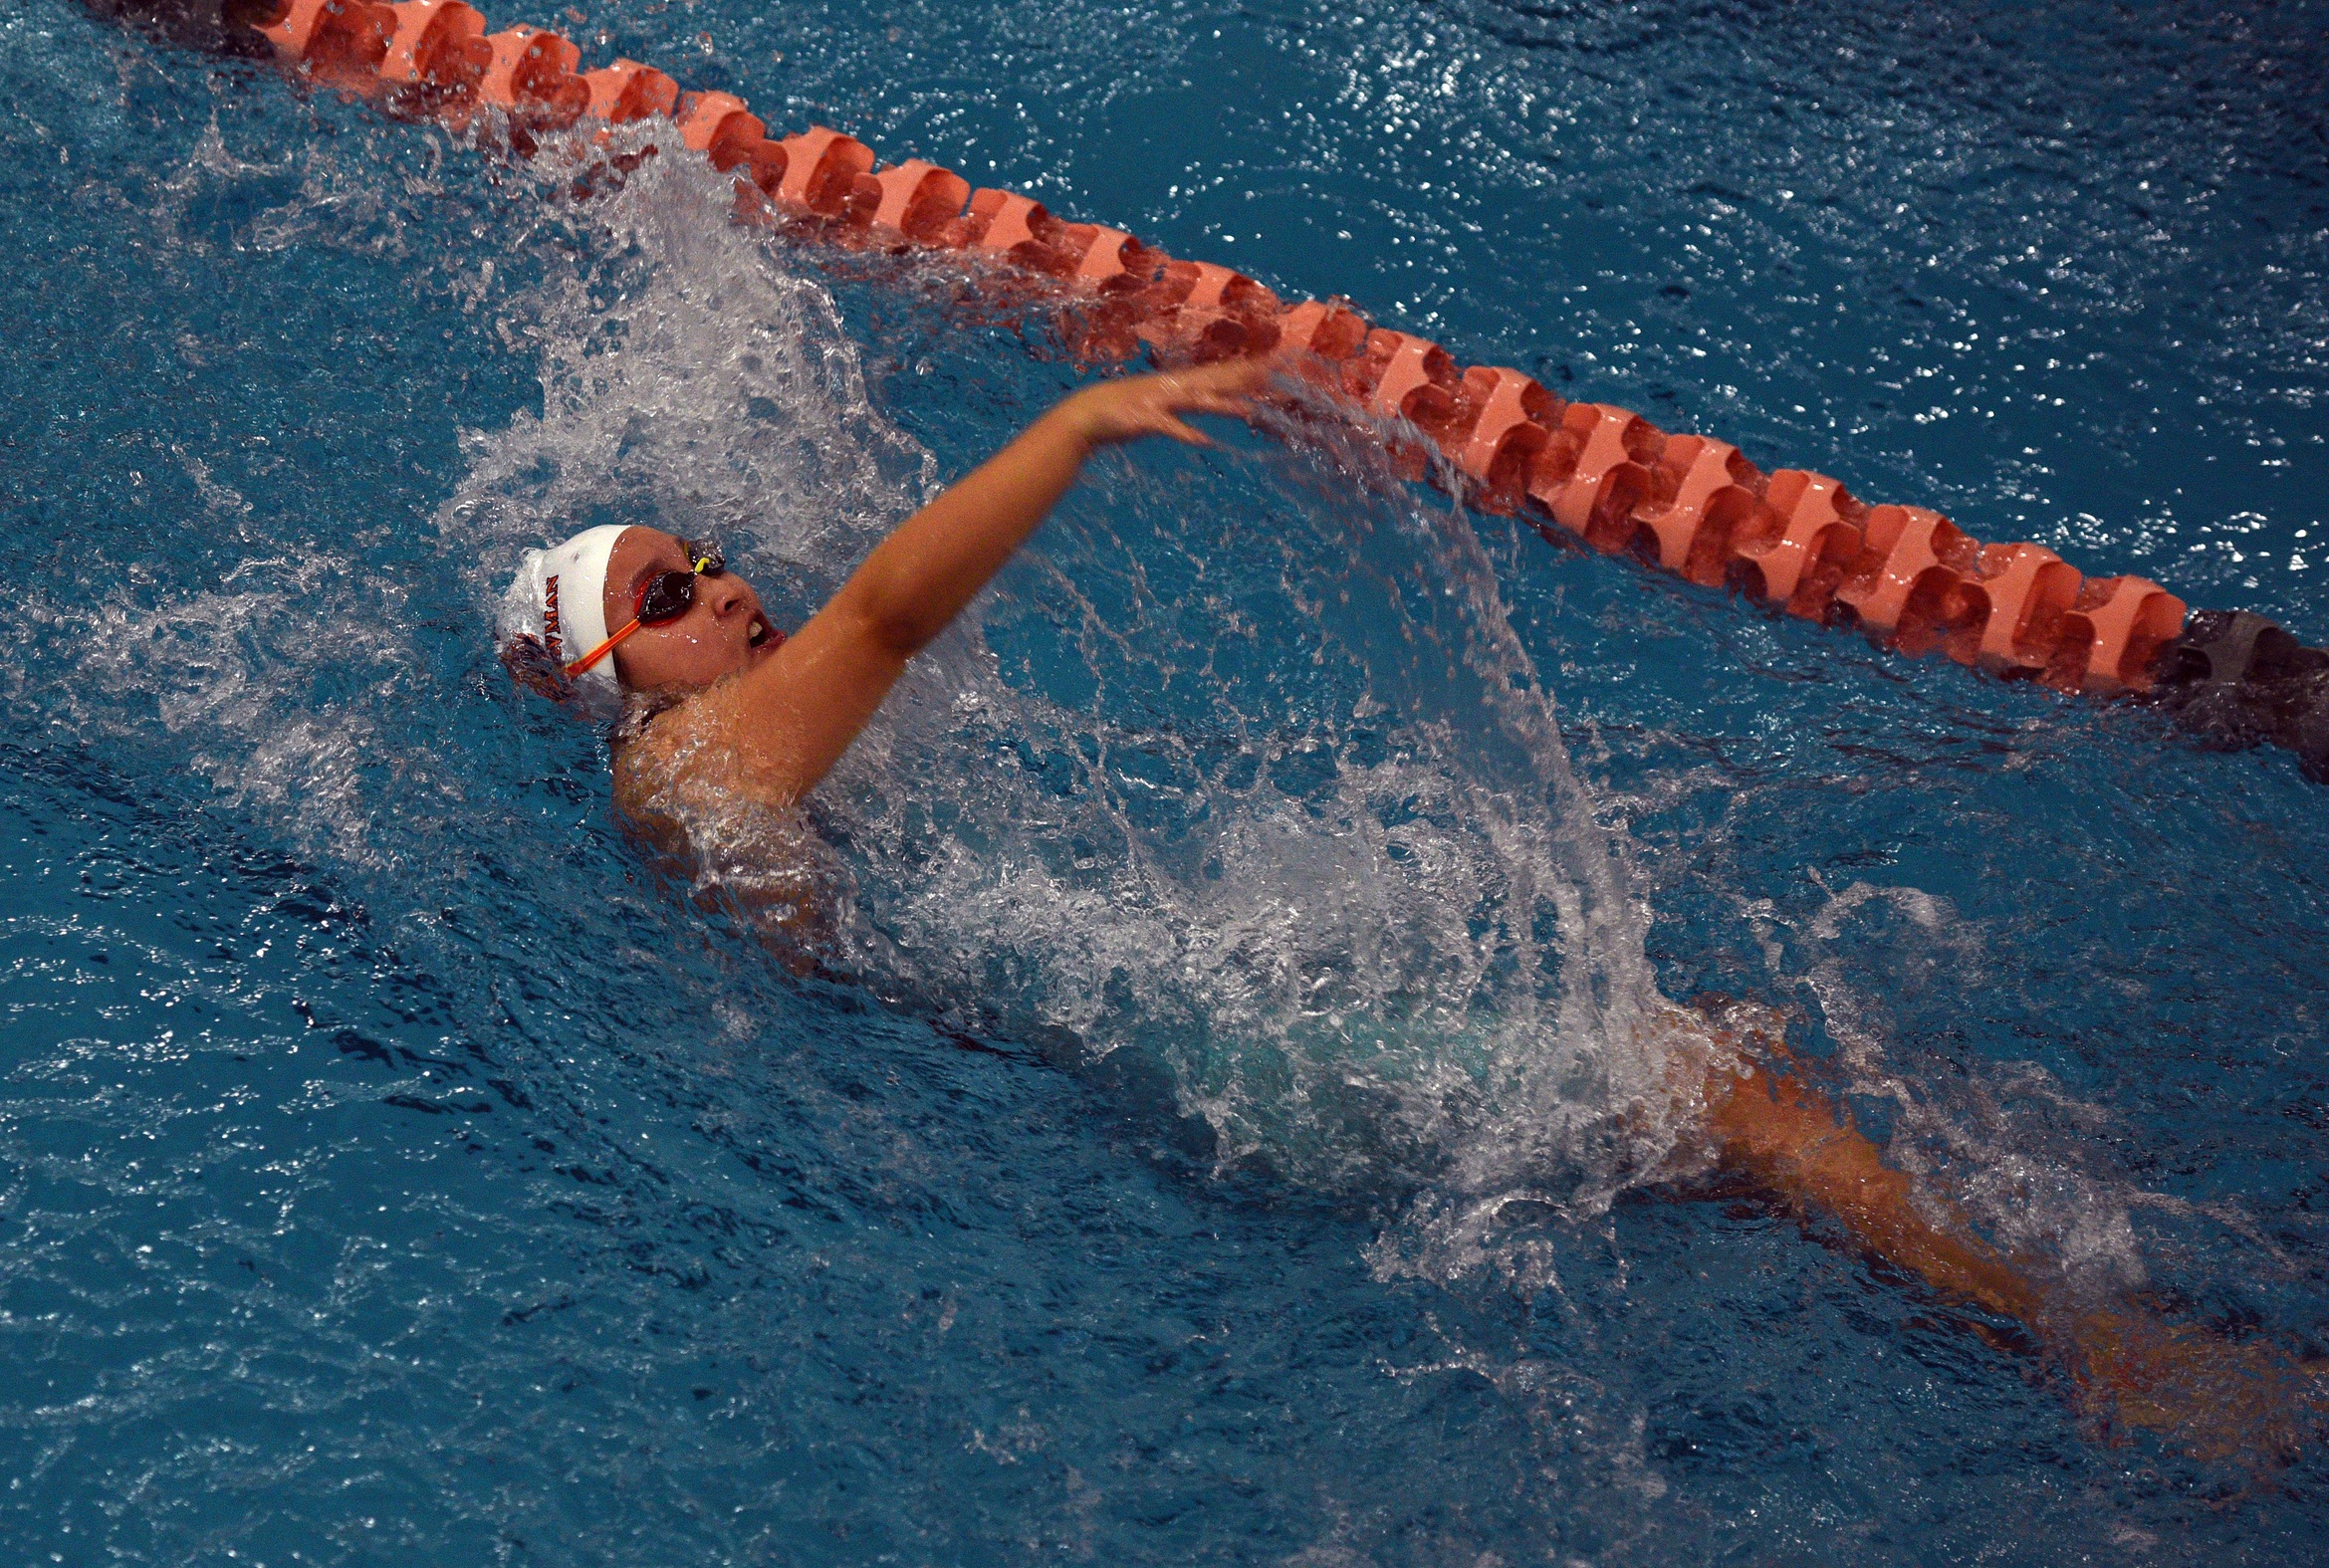 Carson-Newman Women's Swimming brings home victory from first regular season meet against Emory & Henry